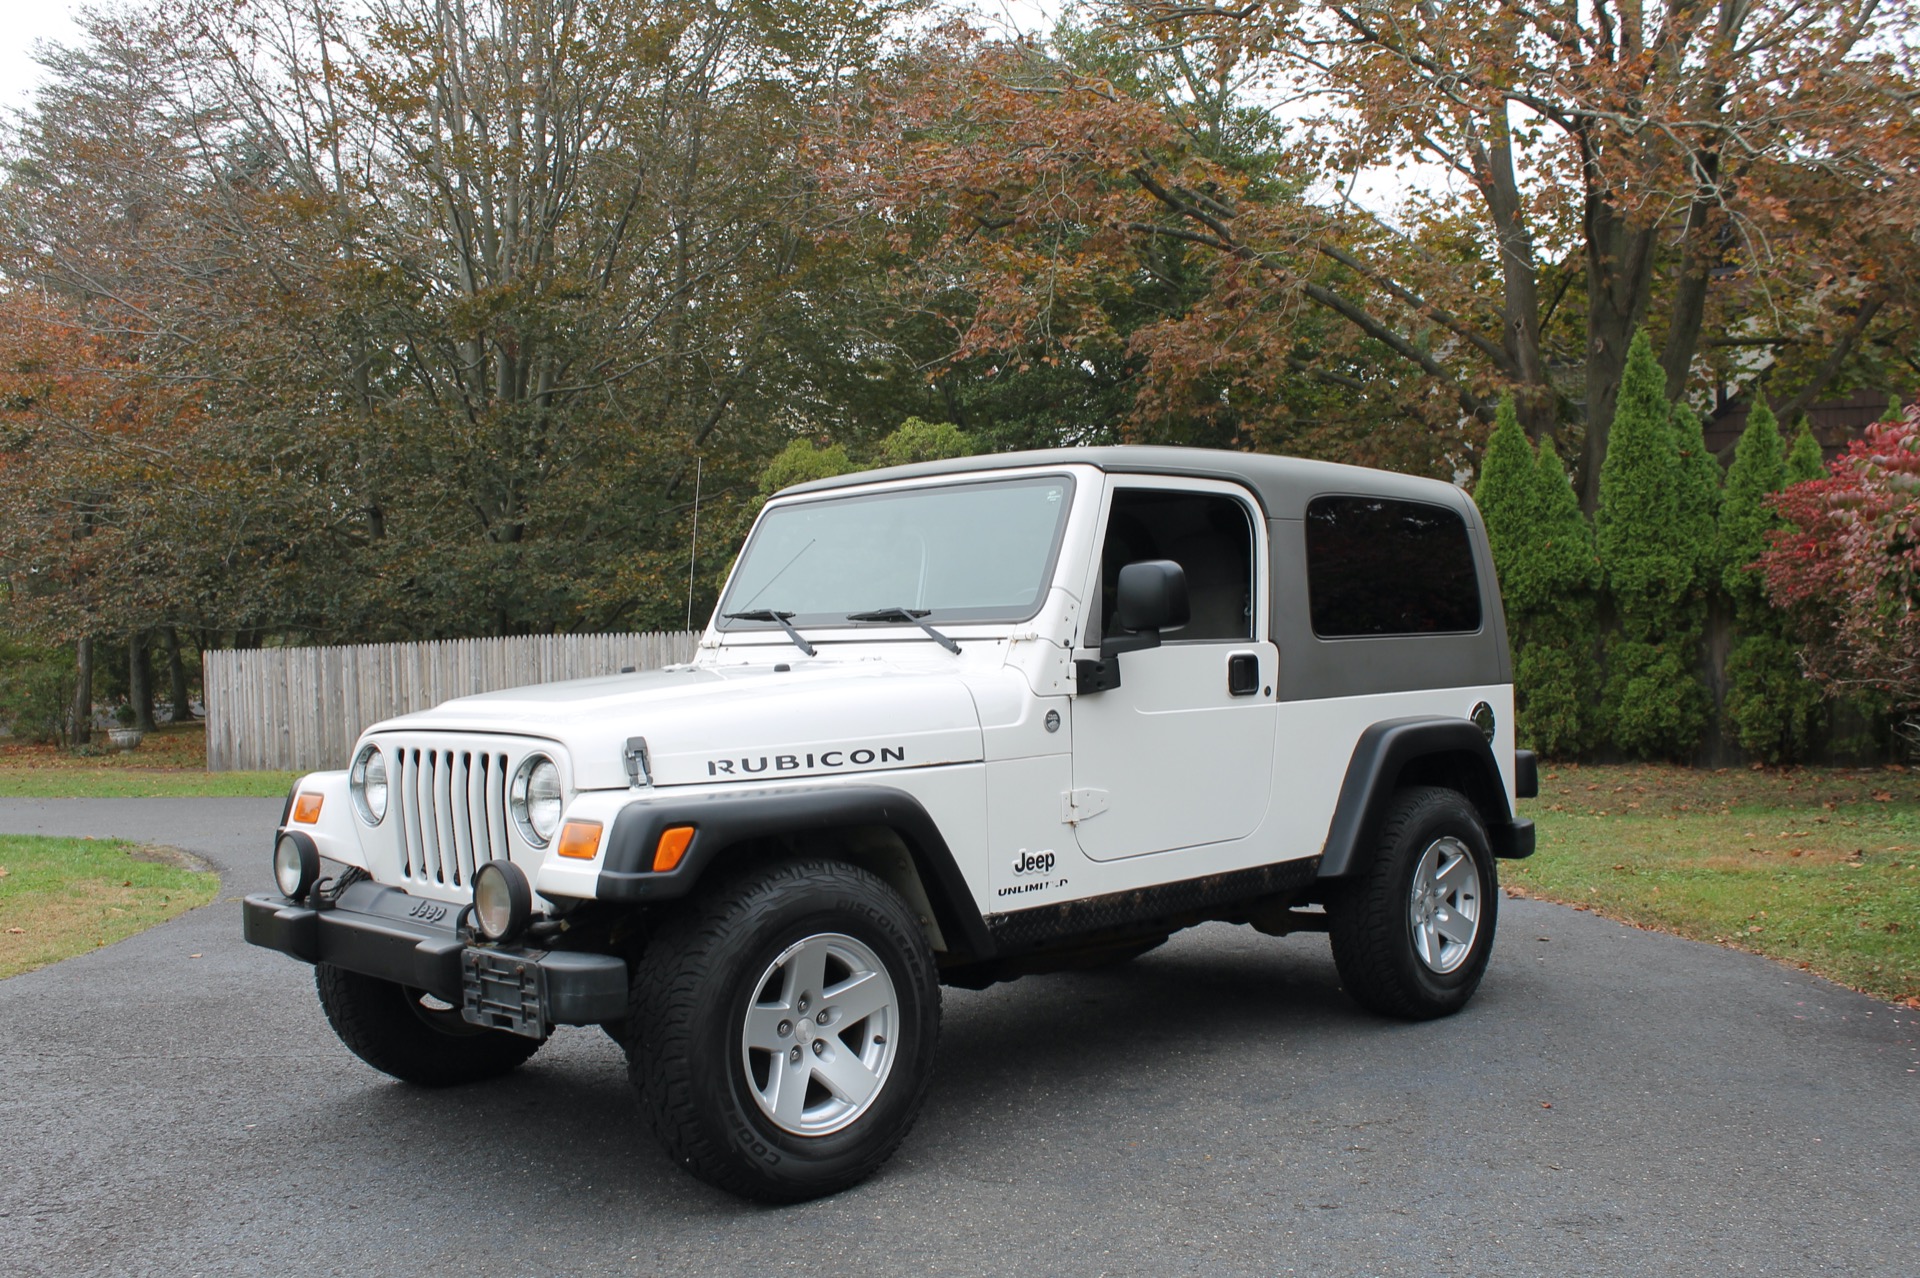 Used 2006 Jeep Wrangler LJ Rubicon Automatic Rubicon For Sale ($15,900) |  Legend Leasing Stock #844